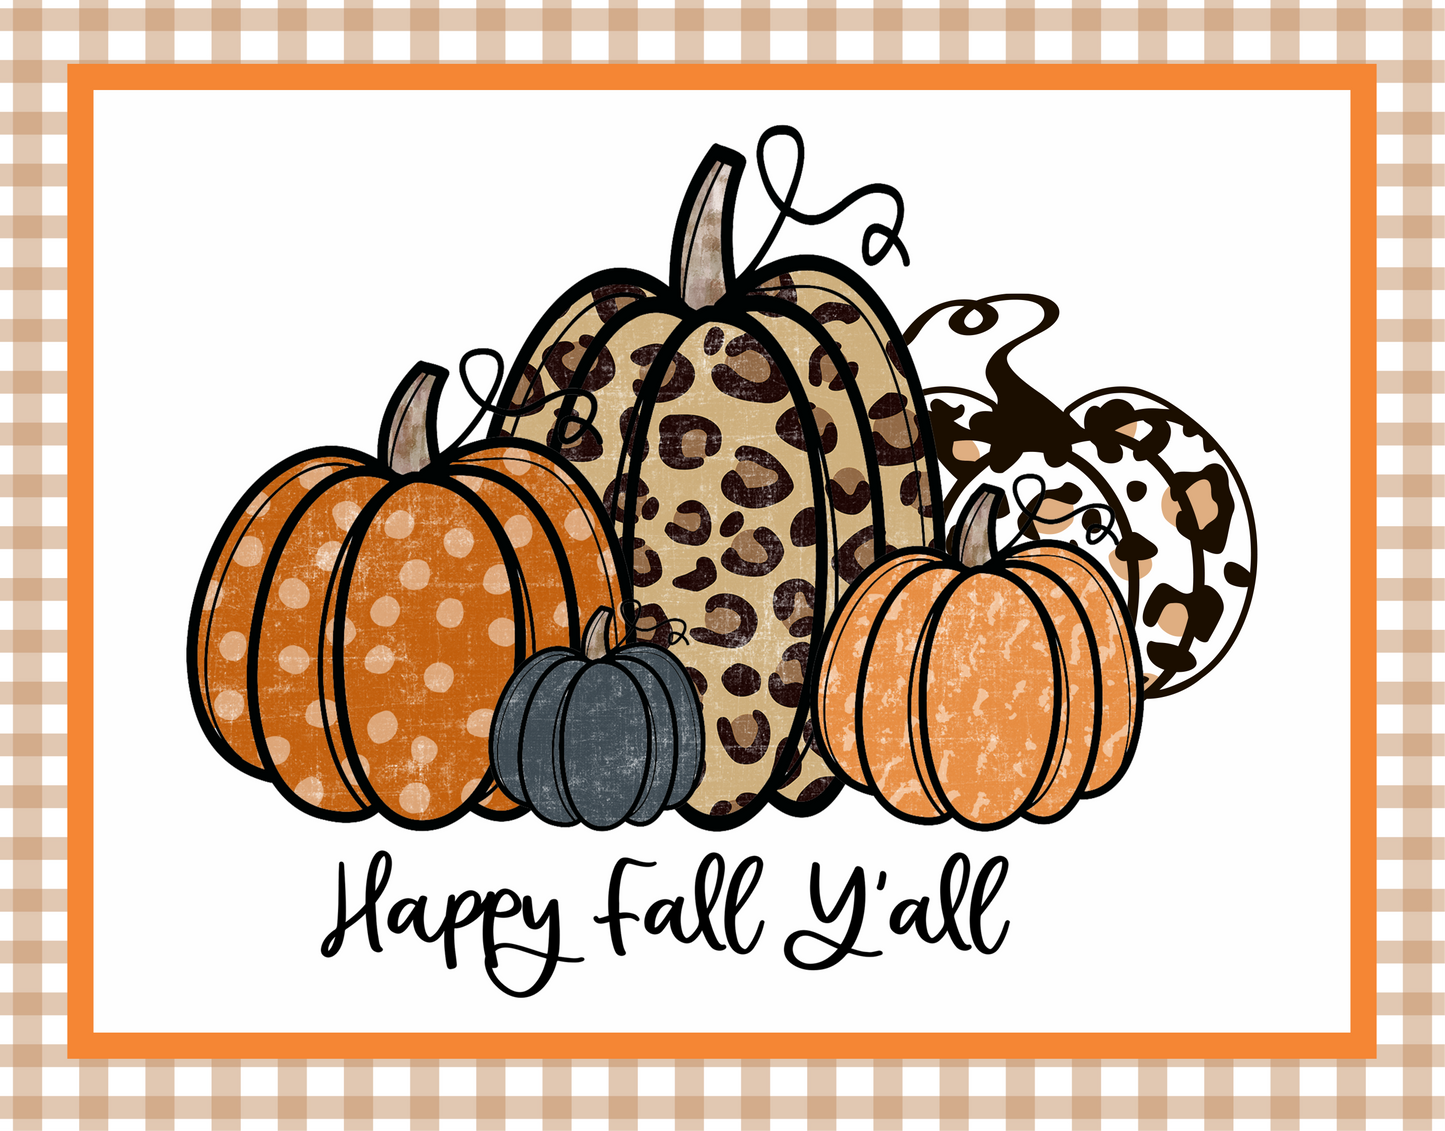 Happy Fall Y'all Leopard and colored pumpkins